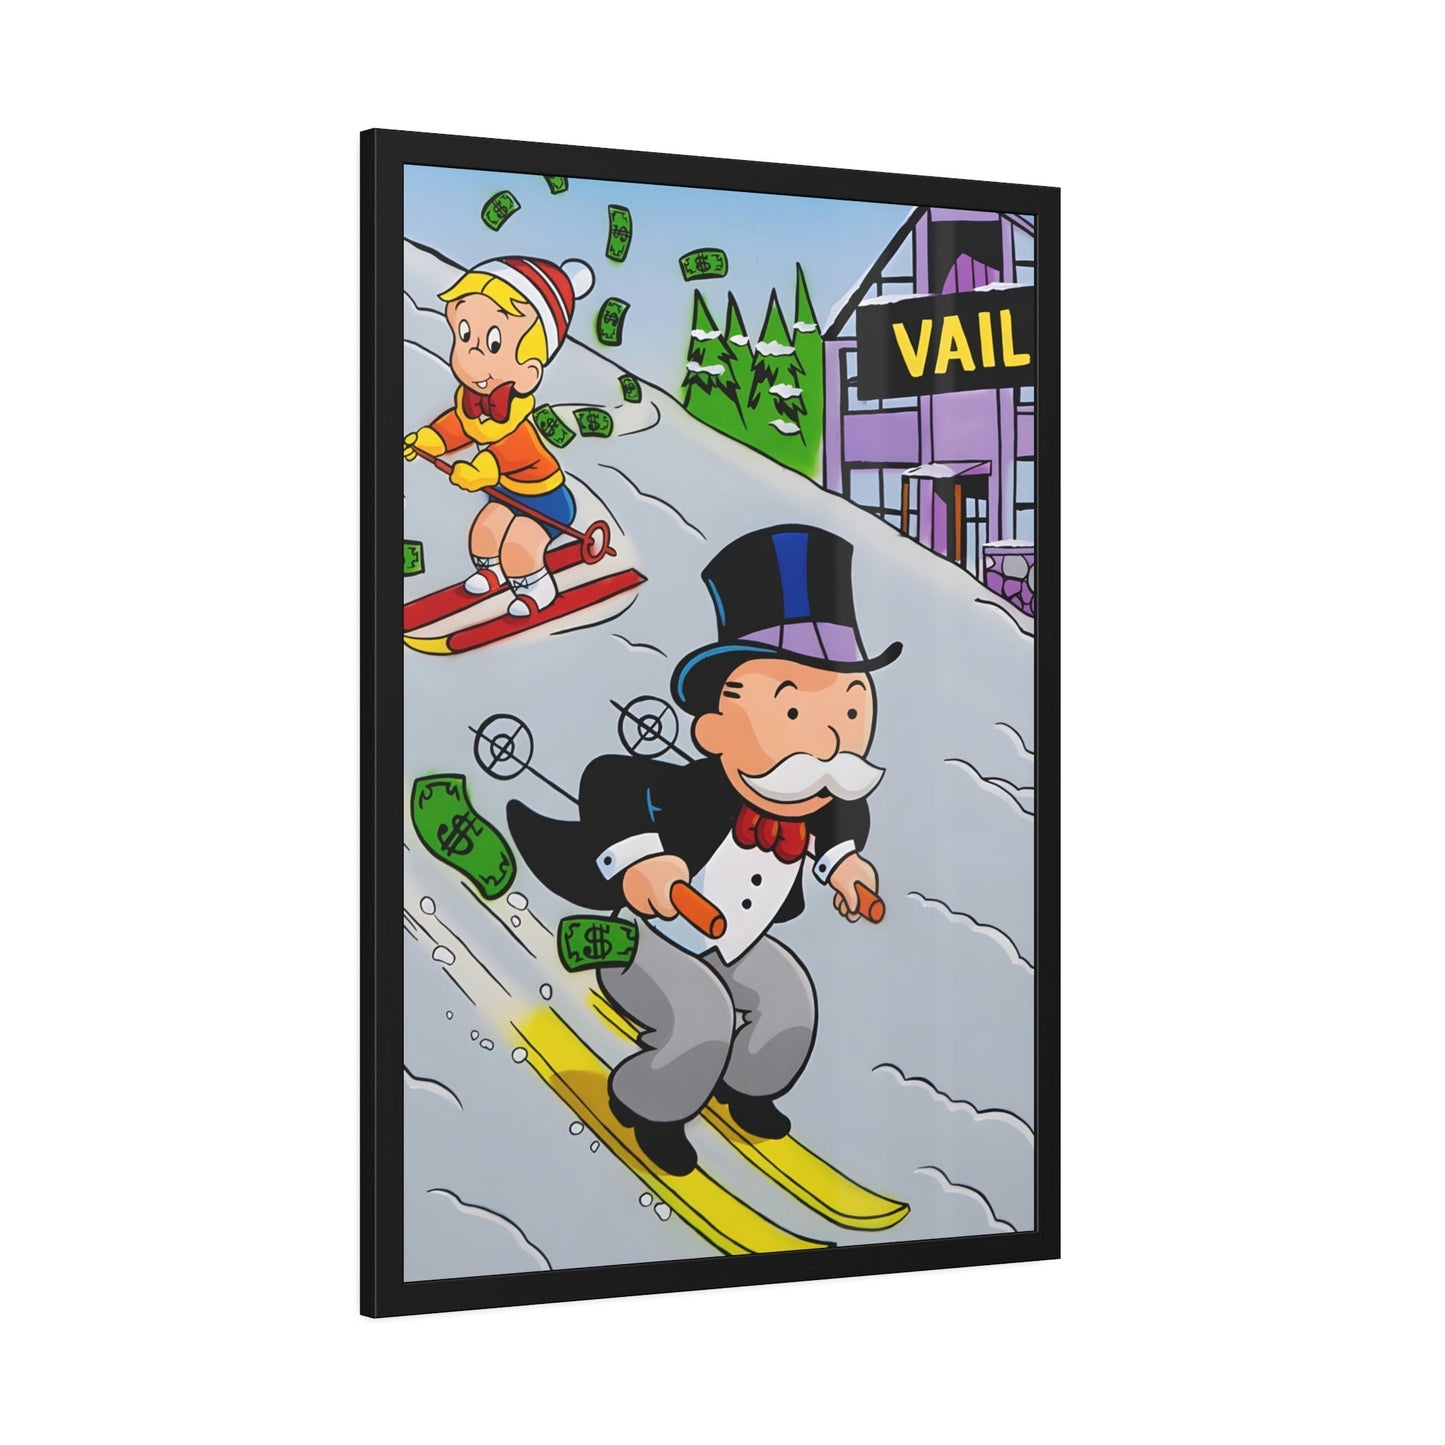 Alec's World: Creative Framed Posters and Canvas Featuring Alec Monopoly's